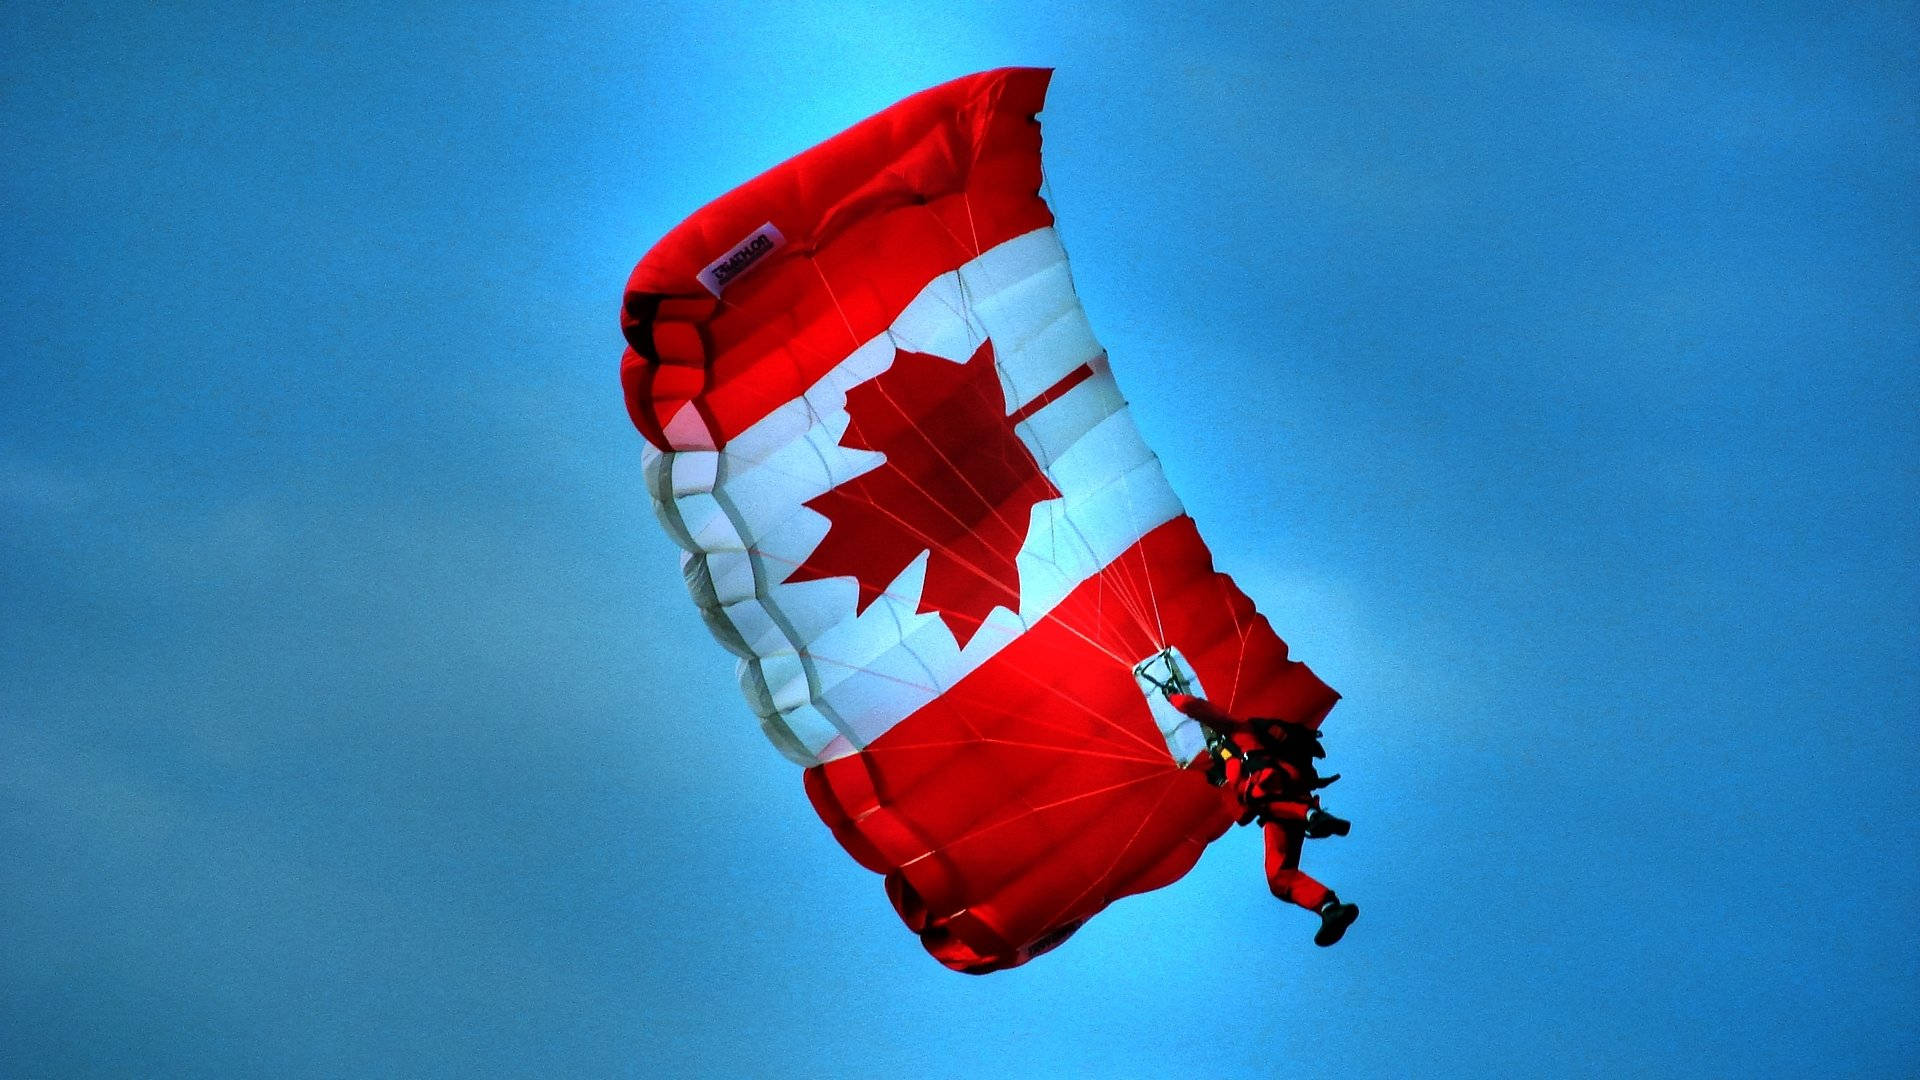 Majestic Shot Of Canada Flag Floating On A Parachute Against The Blue Sky Background